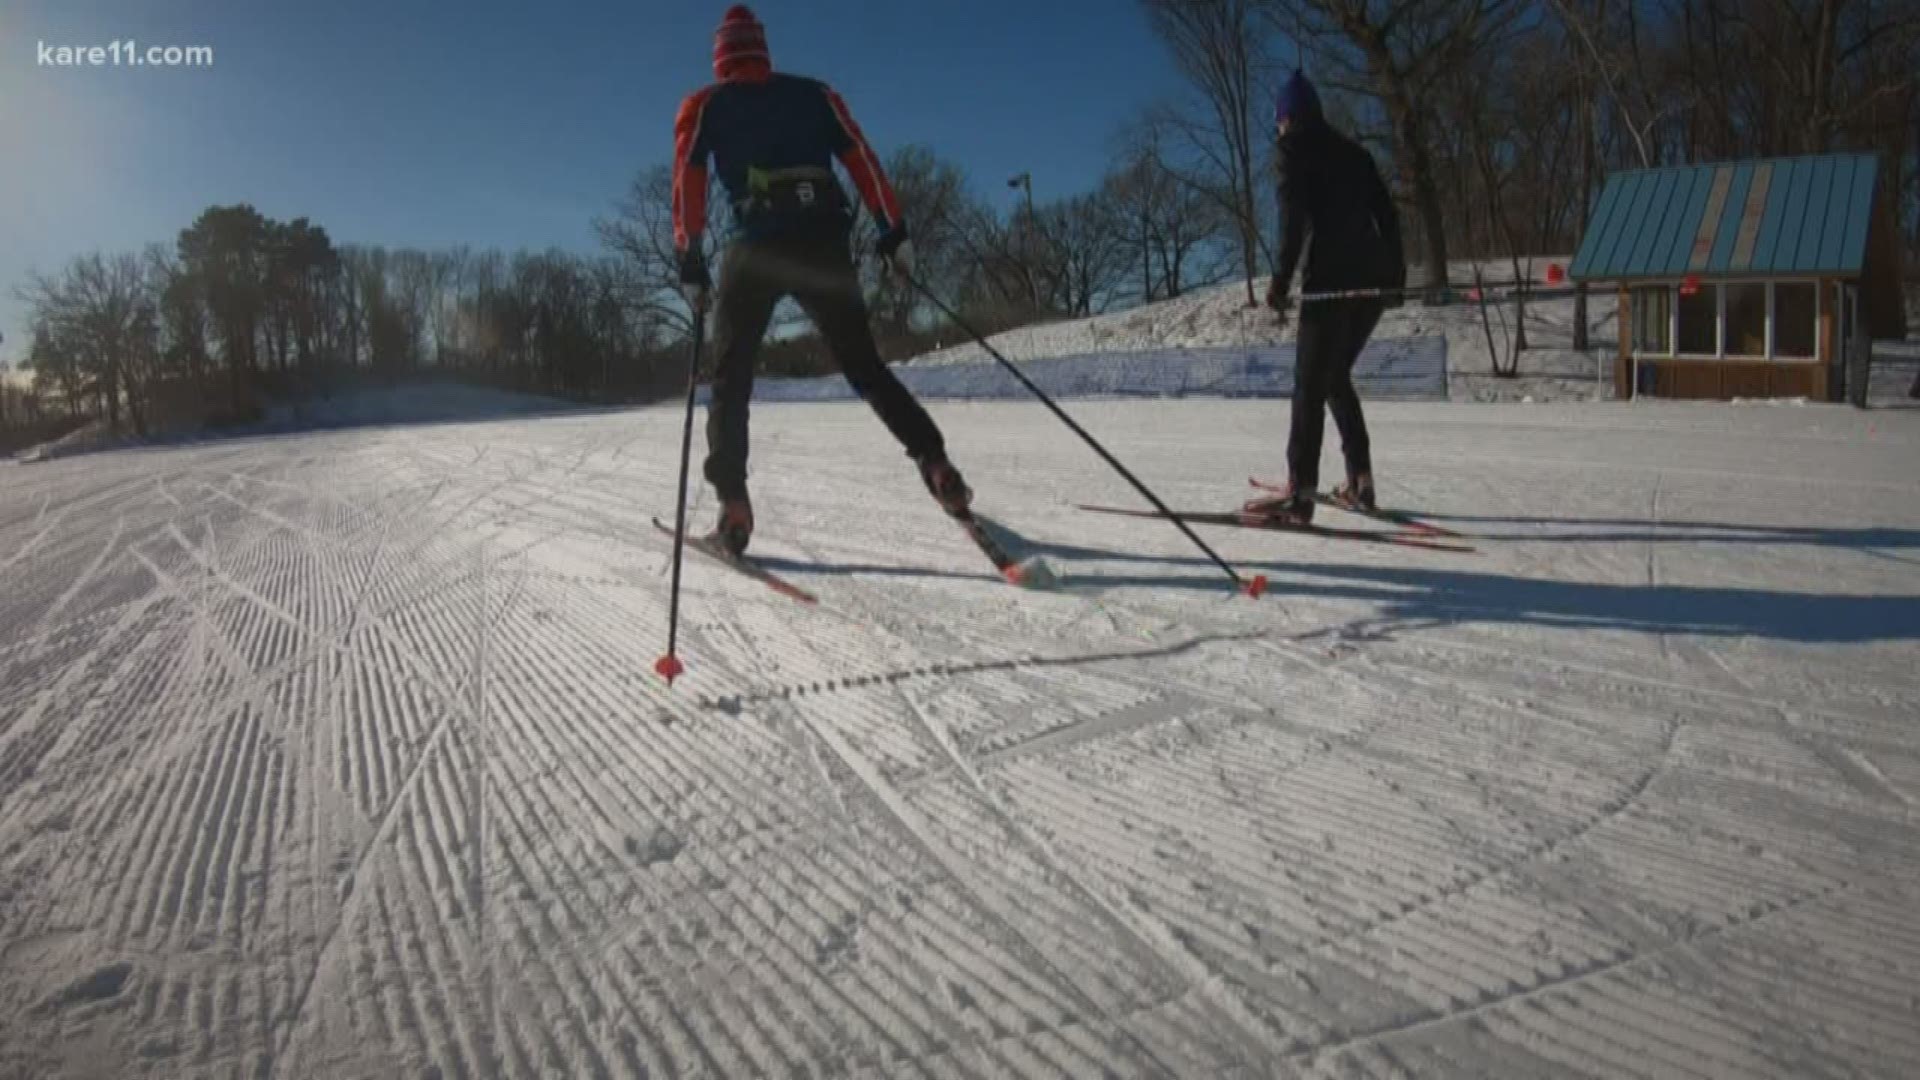 The ski race and all associated events were scheduled for March 14-17 in Minneapolis.